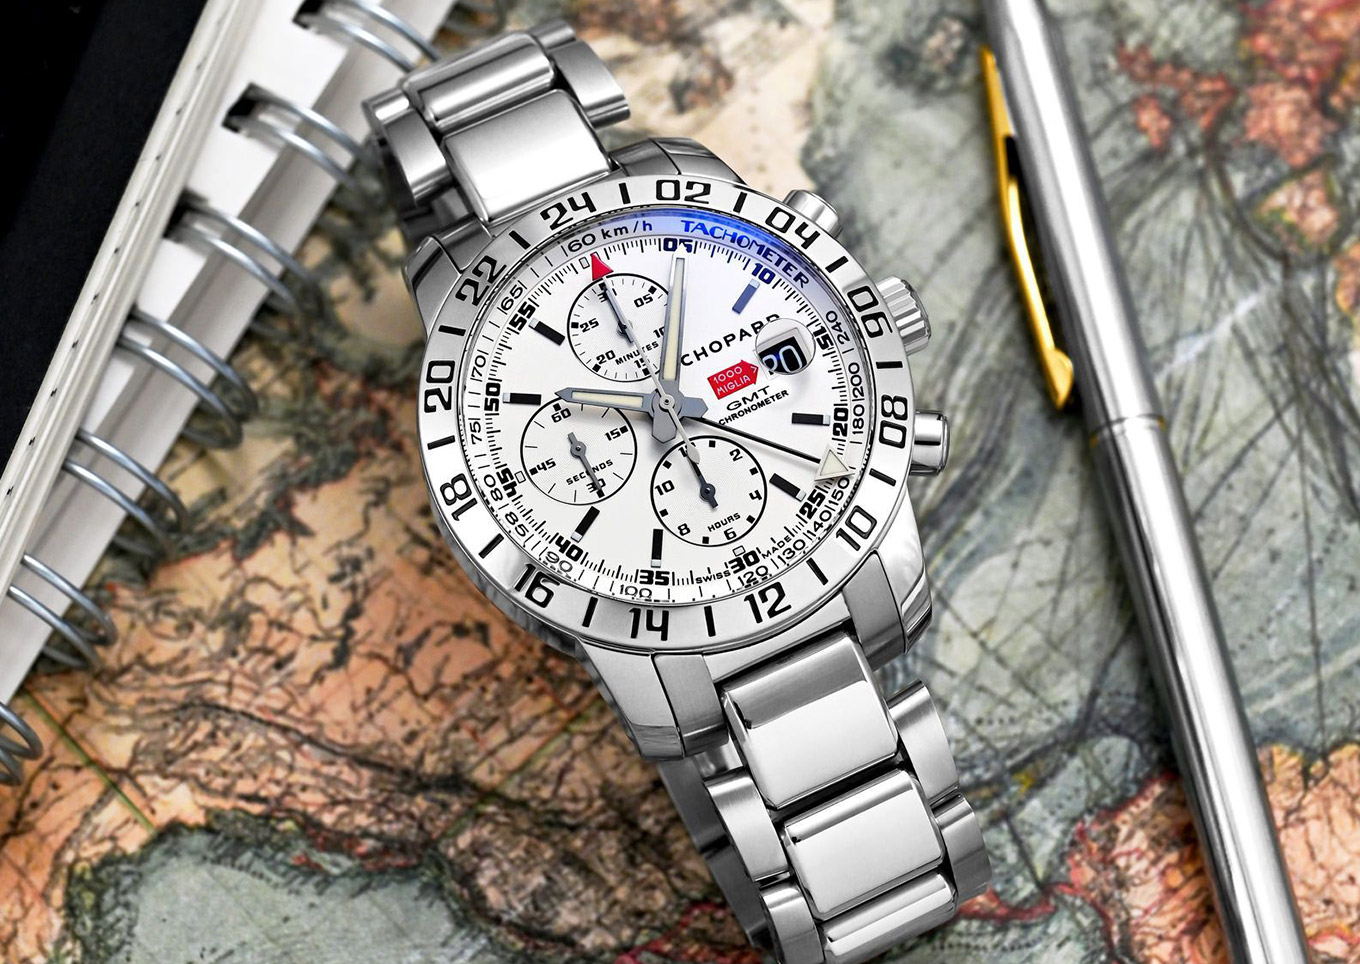 Chopard Mille Miglia GMT Chronograph in a 42mm steel case